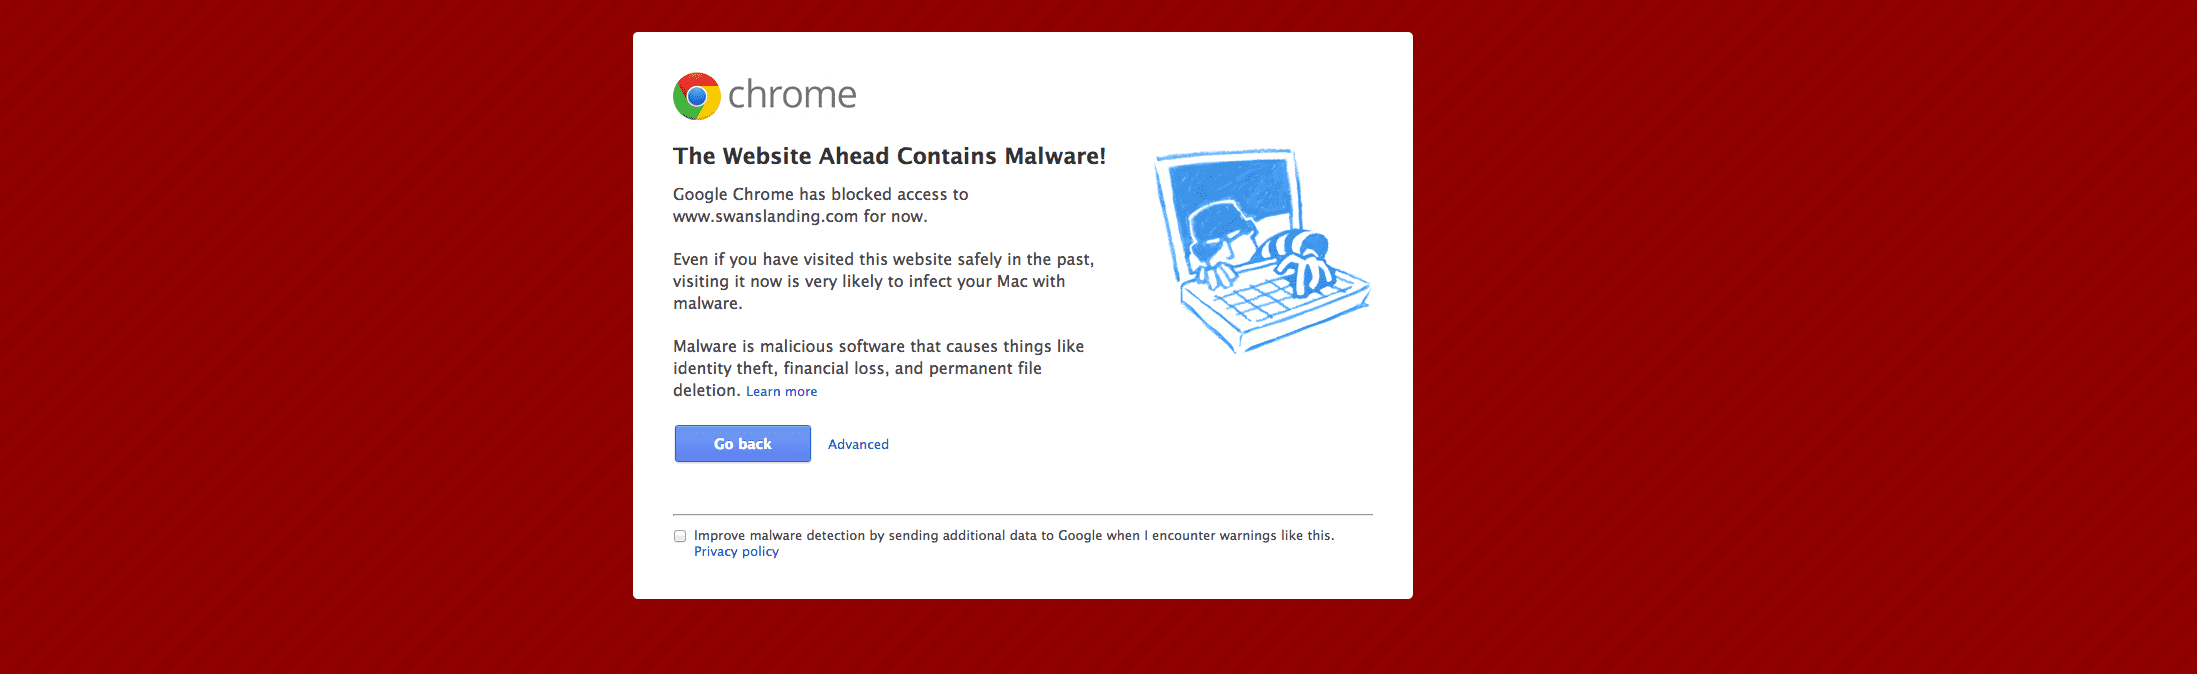 Protecting Website From Malware - Truths